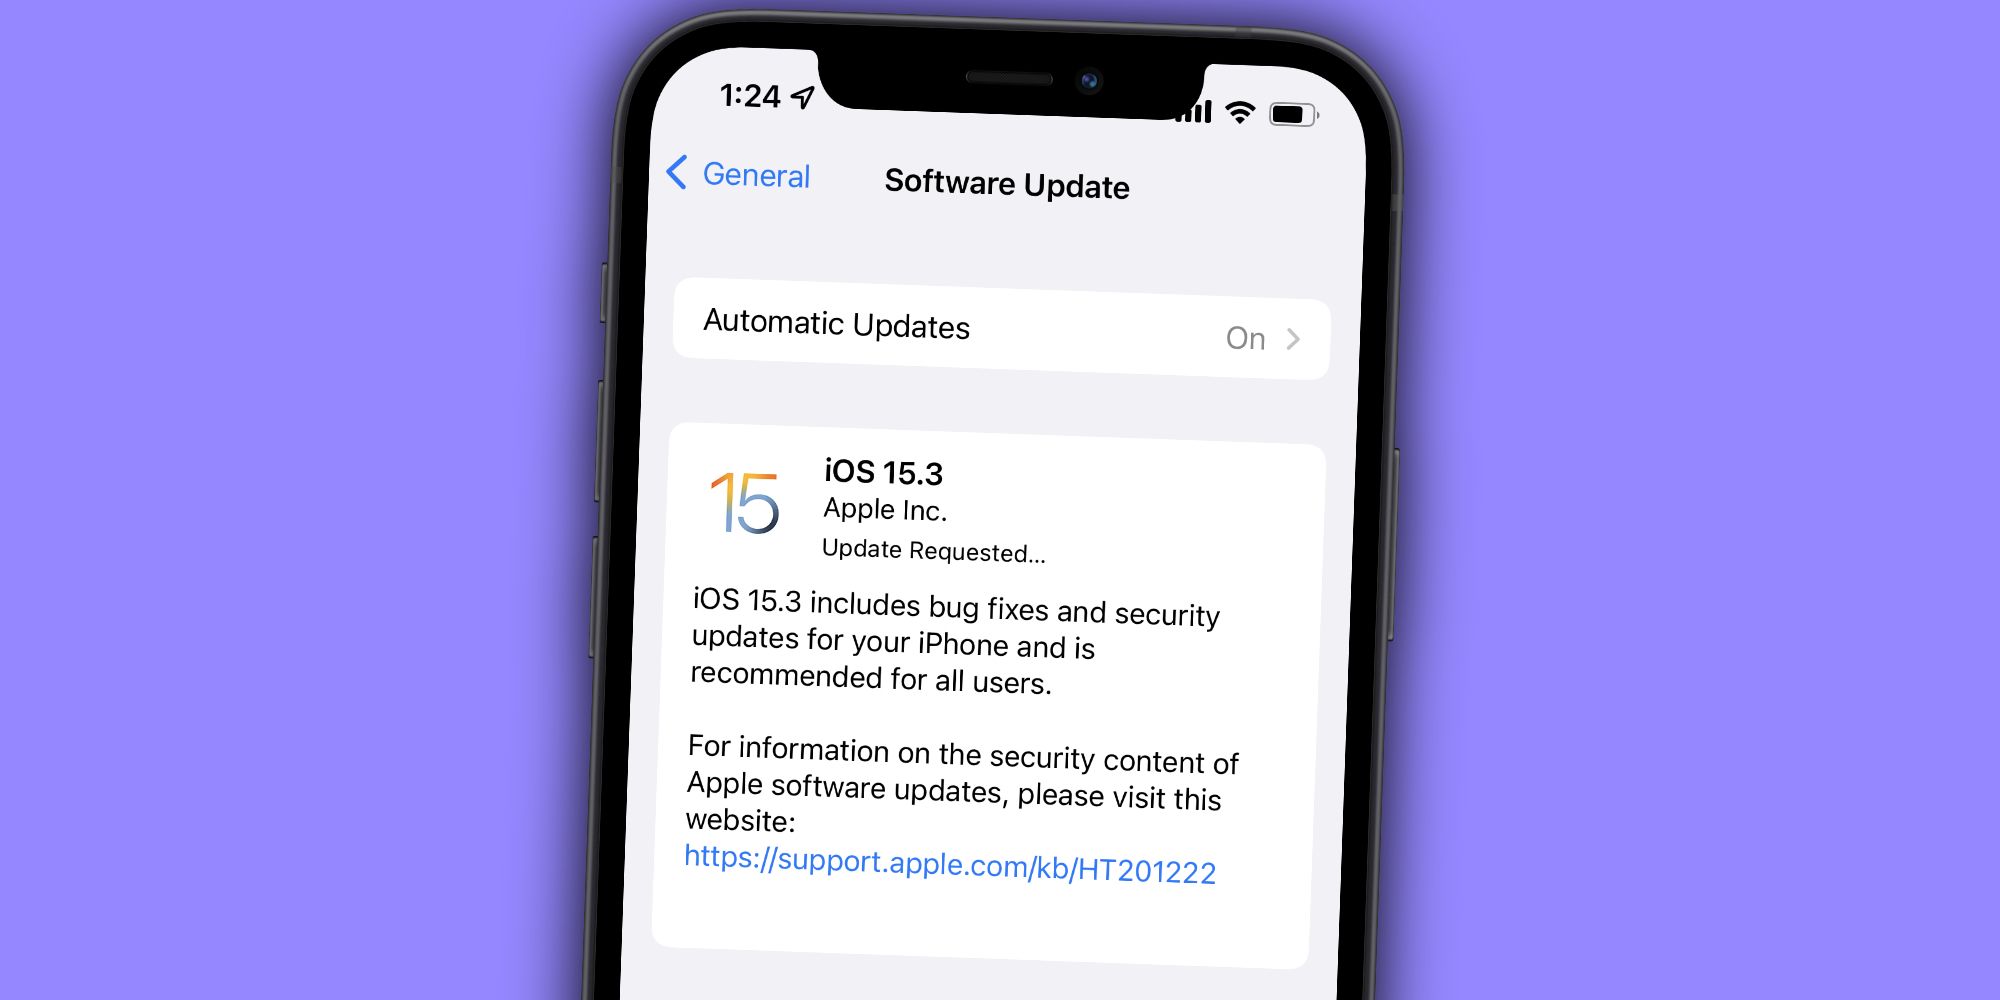 iOS 15.3 update for the iPhone